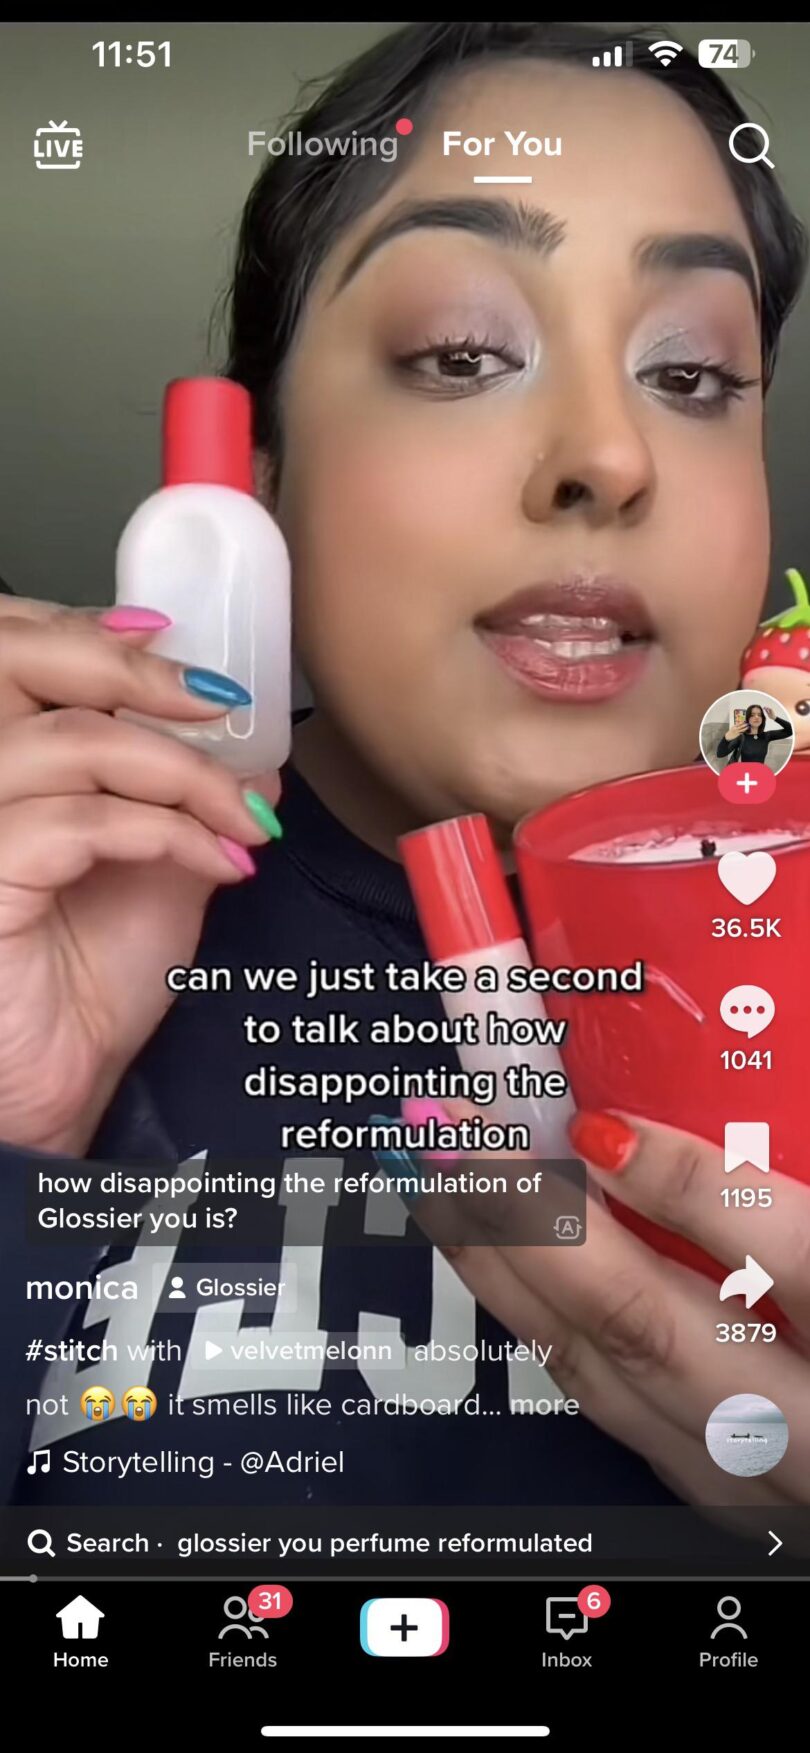 When Did Glossier Reformulate You